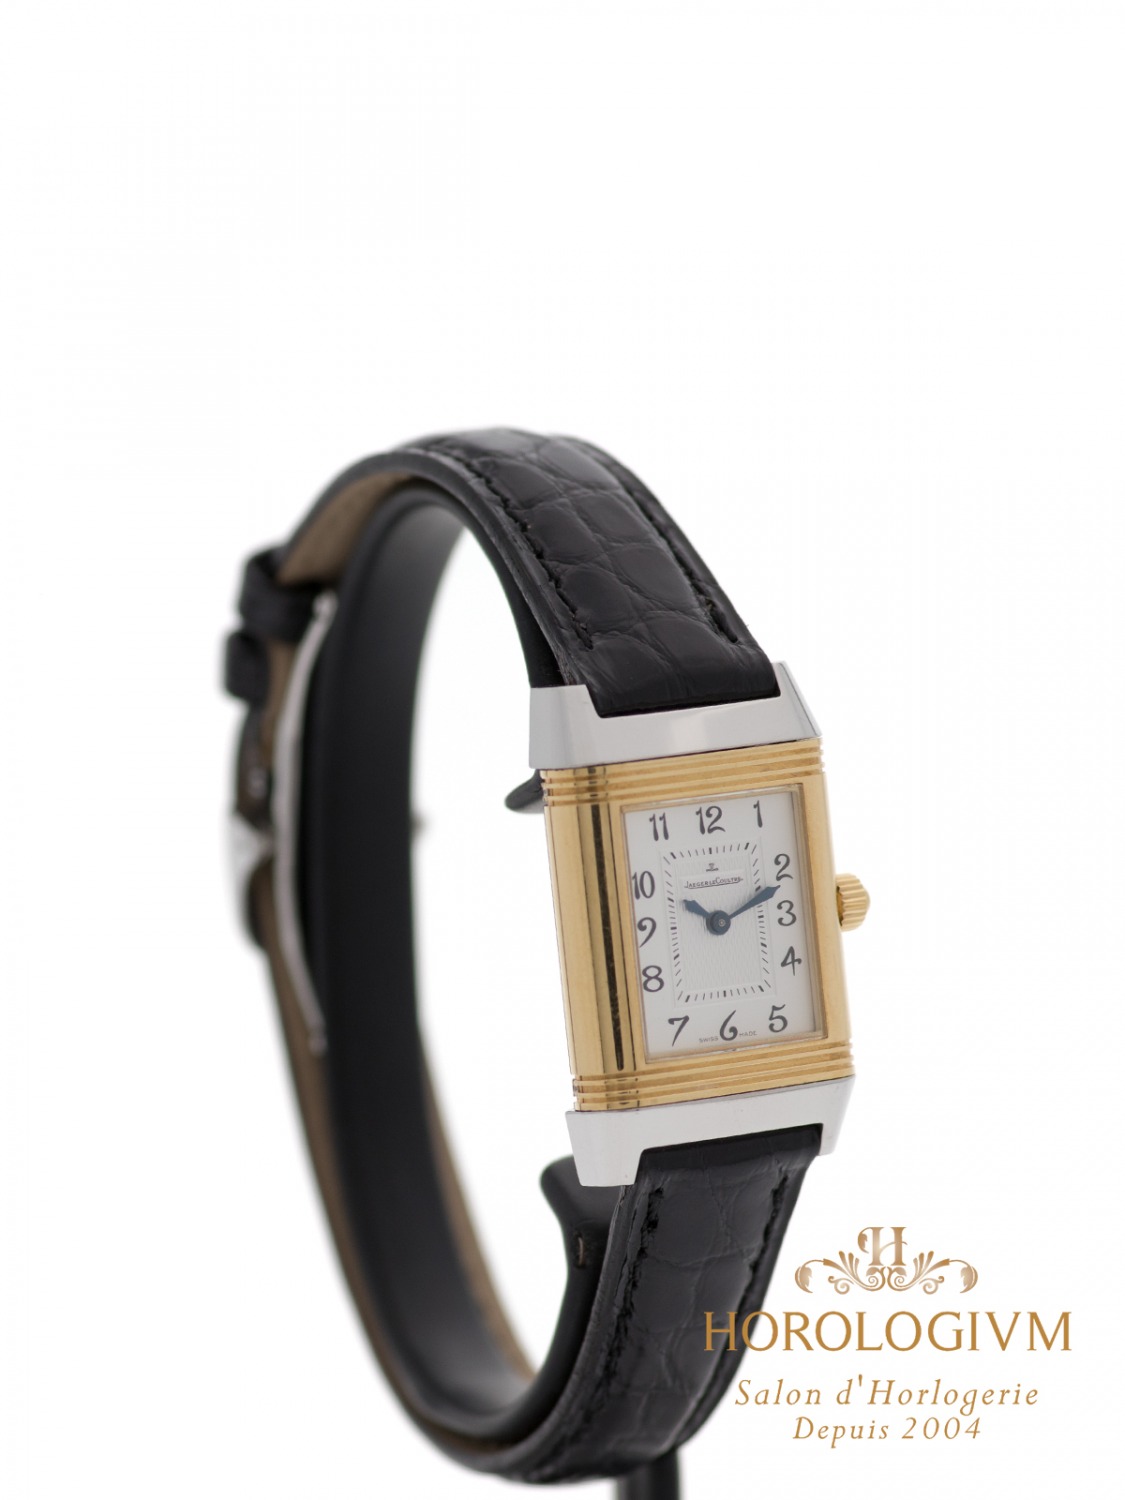 Jaeger LeCoultre Reverso Duetto REF. 266.5.44 watch, yellow gold (watch case) and silver (watch base)